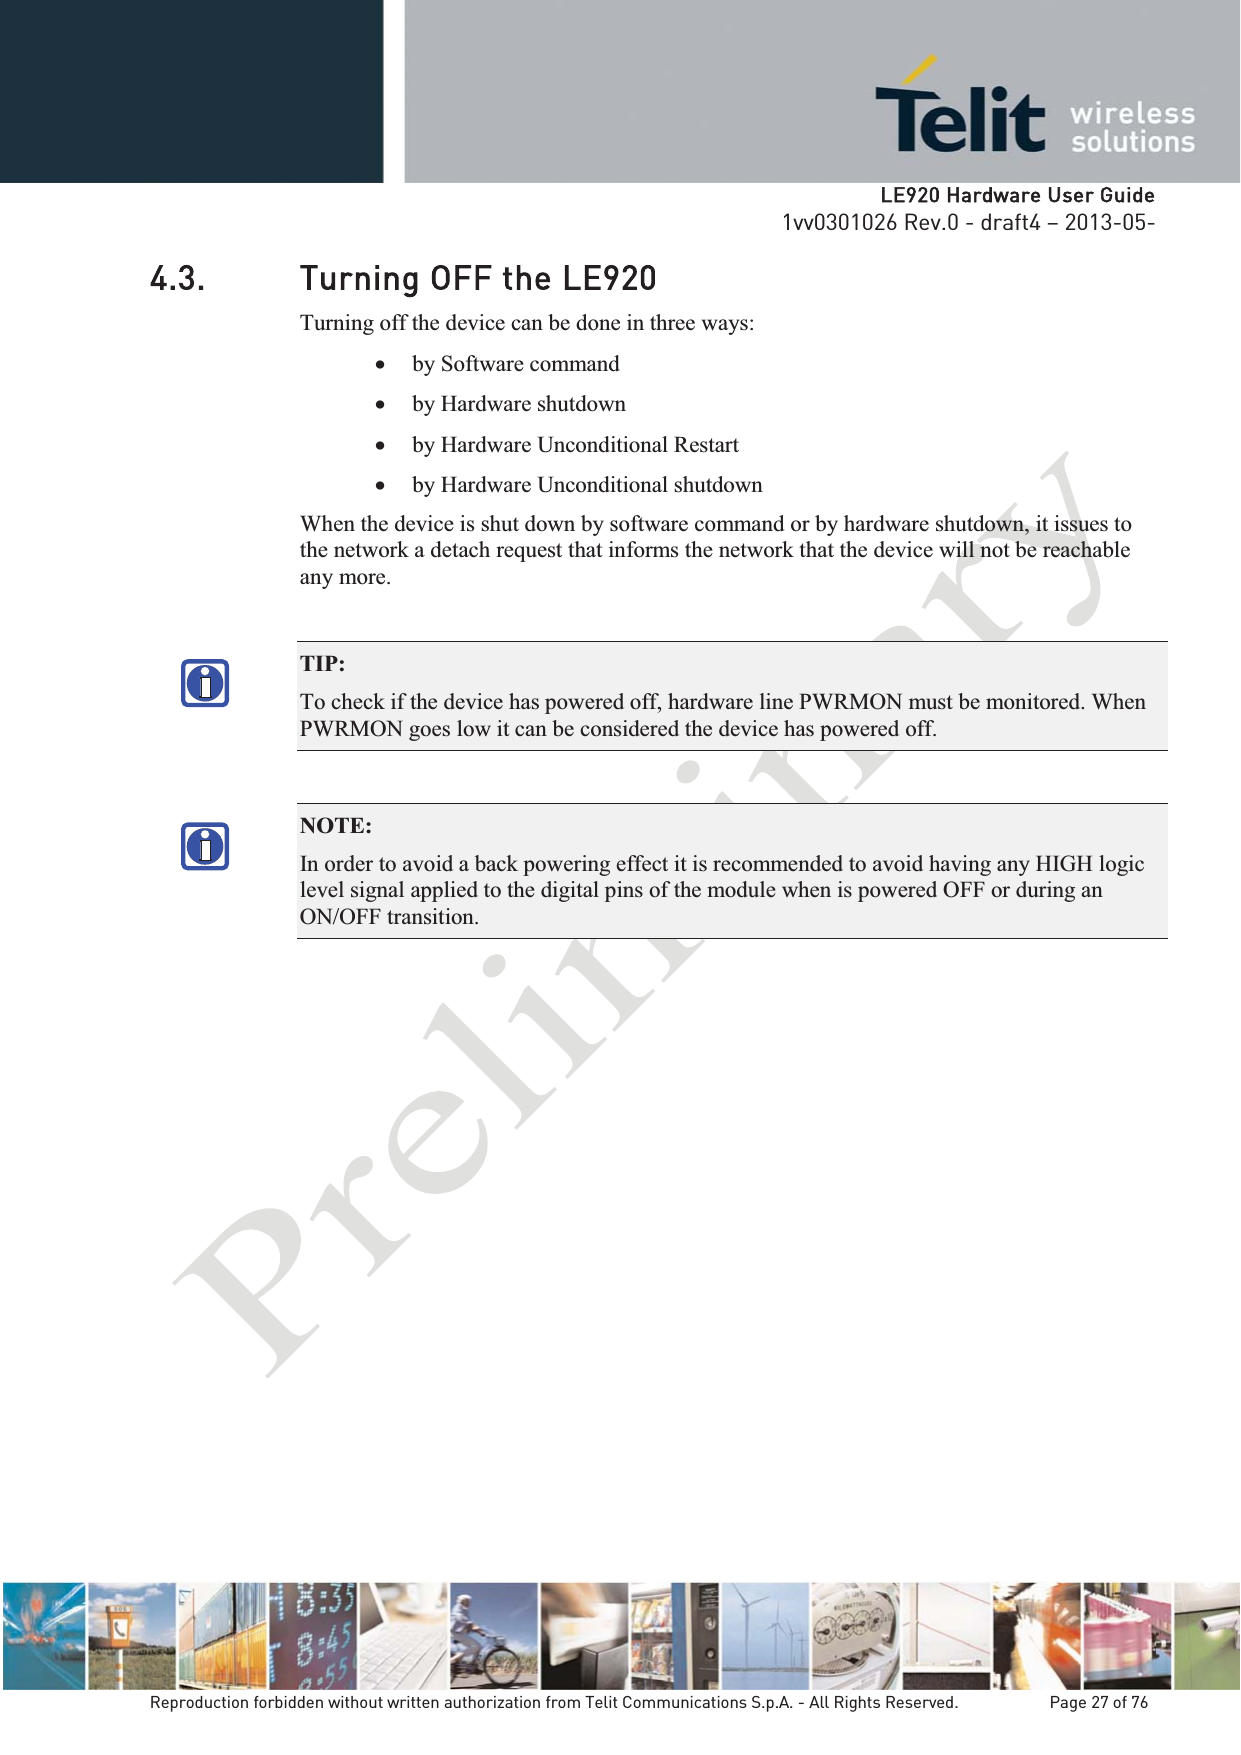   LLE920 Hardware User Guide1vv0301026 Rev.0 - draft4 – 2013-05-Reproduction forbidden without written authorization from Telit Communications S.p.A. - All Rights Reserved.    Page 27 of 76 4.3. Turning OFF the LE920 Turning off the device can be done in three ways: x by Software command   x by Hardware shutdown x by Hardware Unconditional Restart x by Hardware Unconditional shutdown When the device is shut down by software command or by hardware shutdown, it issues to the network a detach request that informs the network that the device will not be reachable any more.  TIP:  To check if the device has powered off, hardware line PWRMON must be monitored. When PWRMON goes low it can be considered the device has powered off. NOTE:  In order to avoid a back powering effect it is recommended to avoid having any HIGH logic level signal applied to the digital pins of the module when is powered OFF or during an ON/OFF transition. 